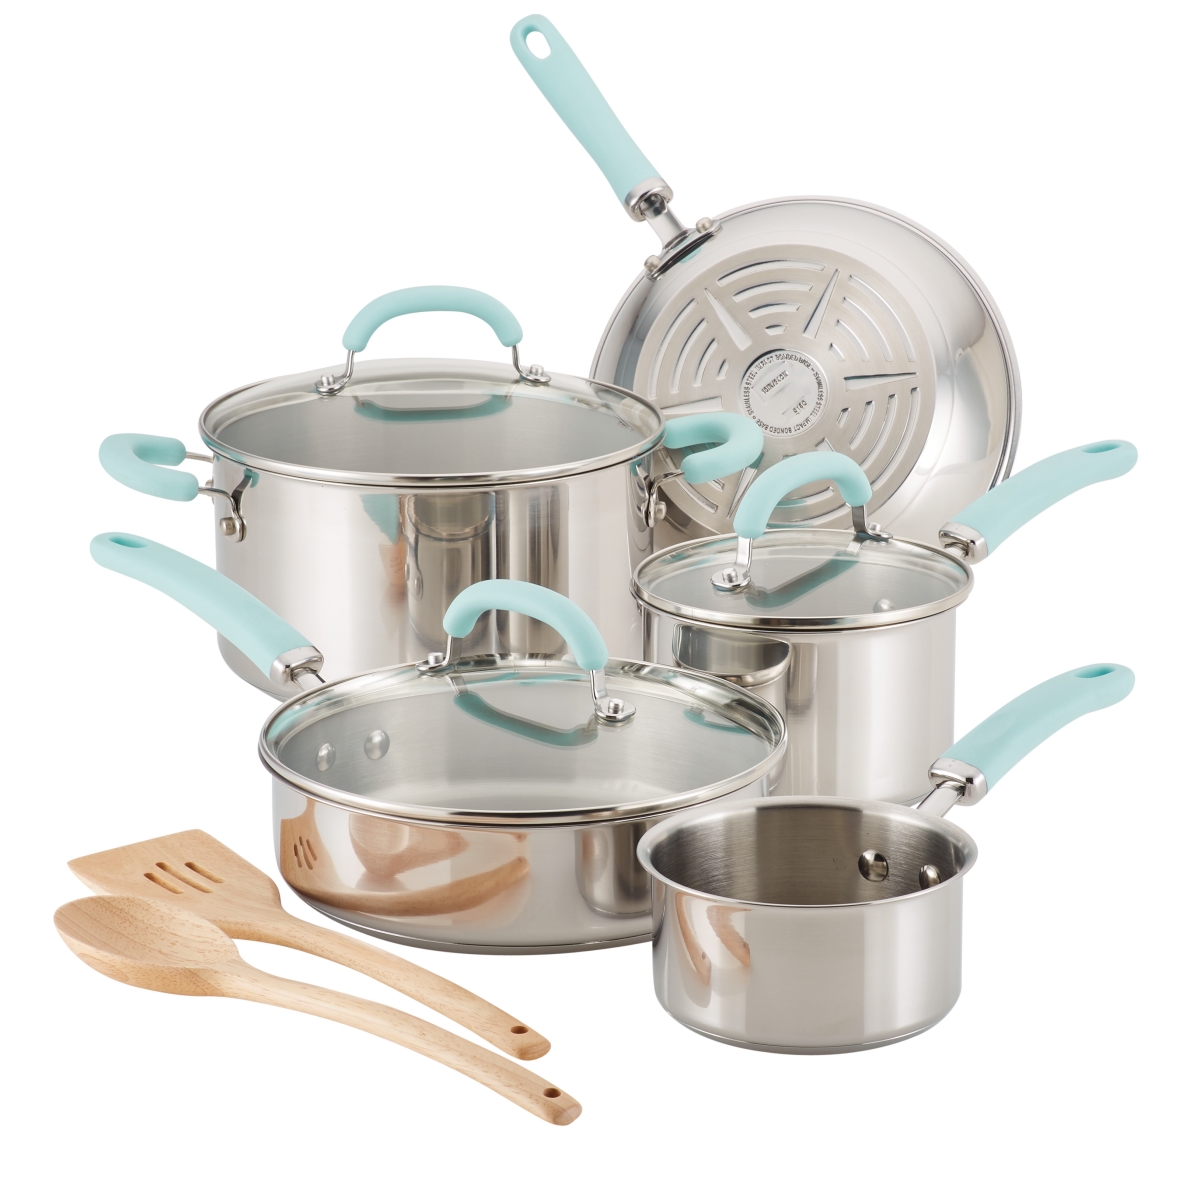 Picture of Rachael Ray 70412 Create Delicious Stainless Steel Cookware Set, 10 Piece - Light Blue Handles